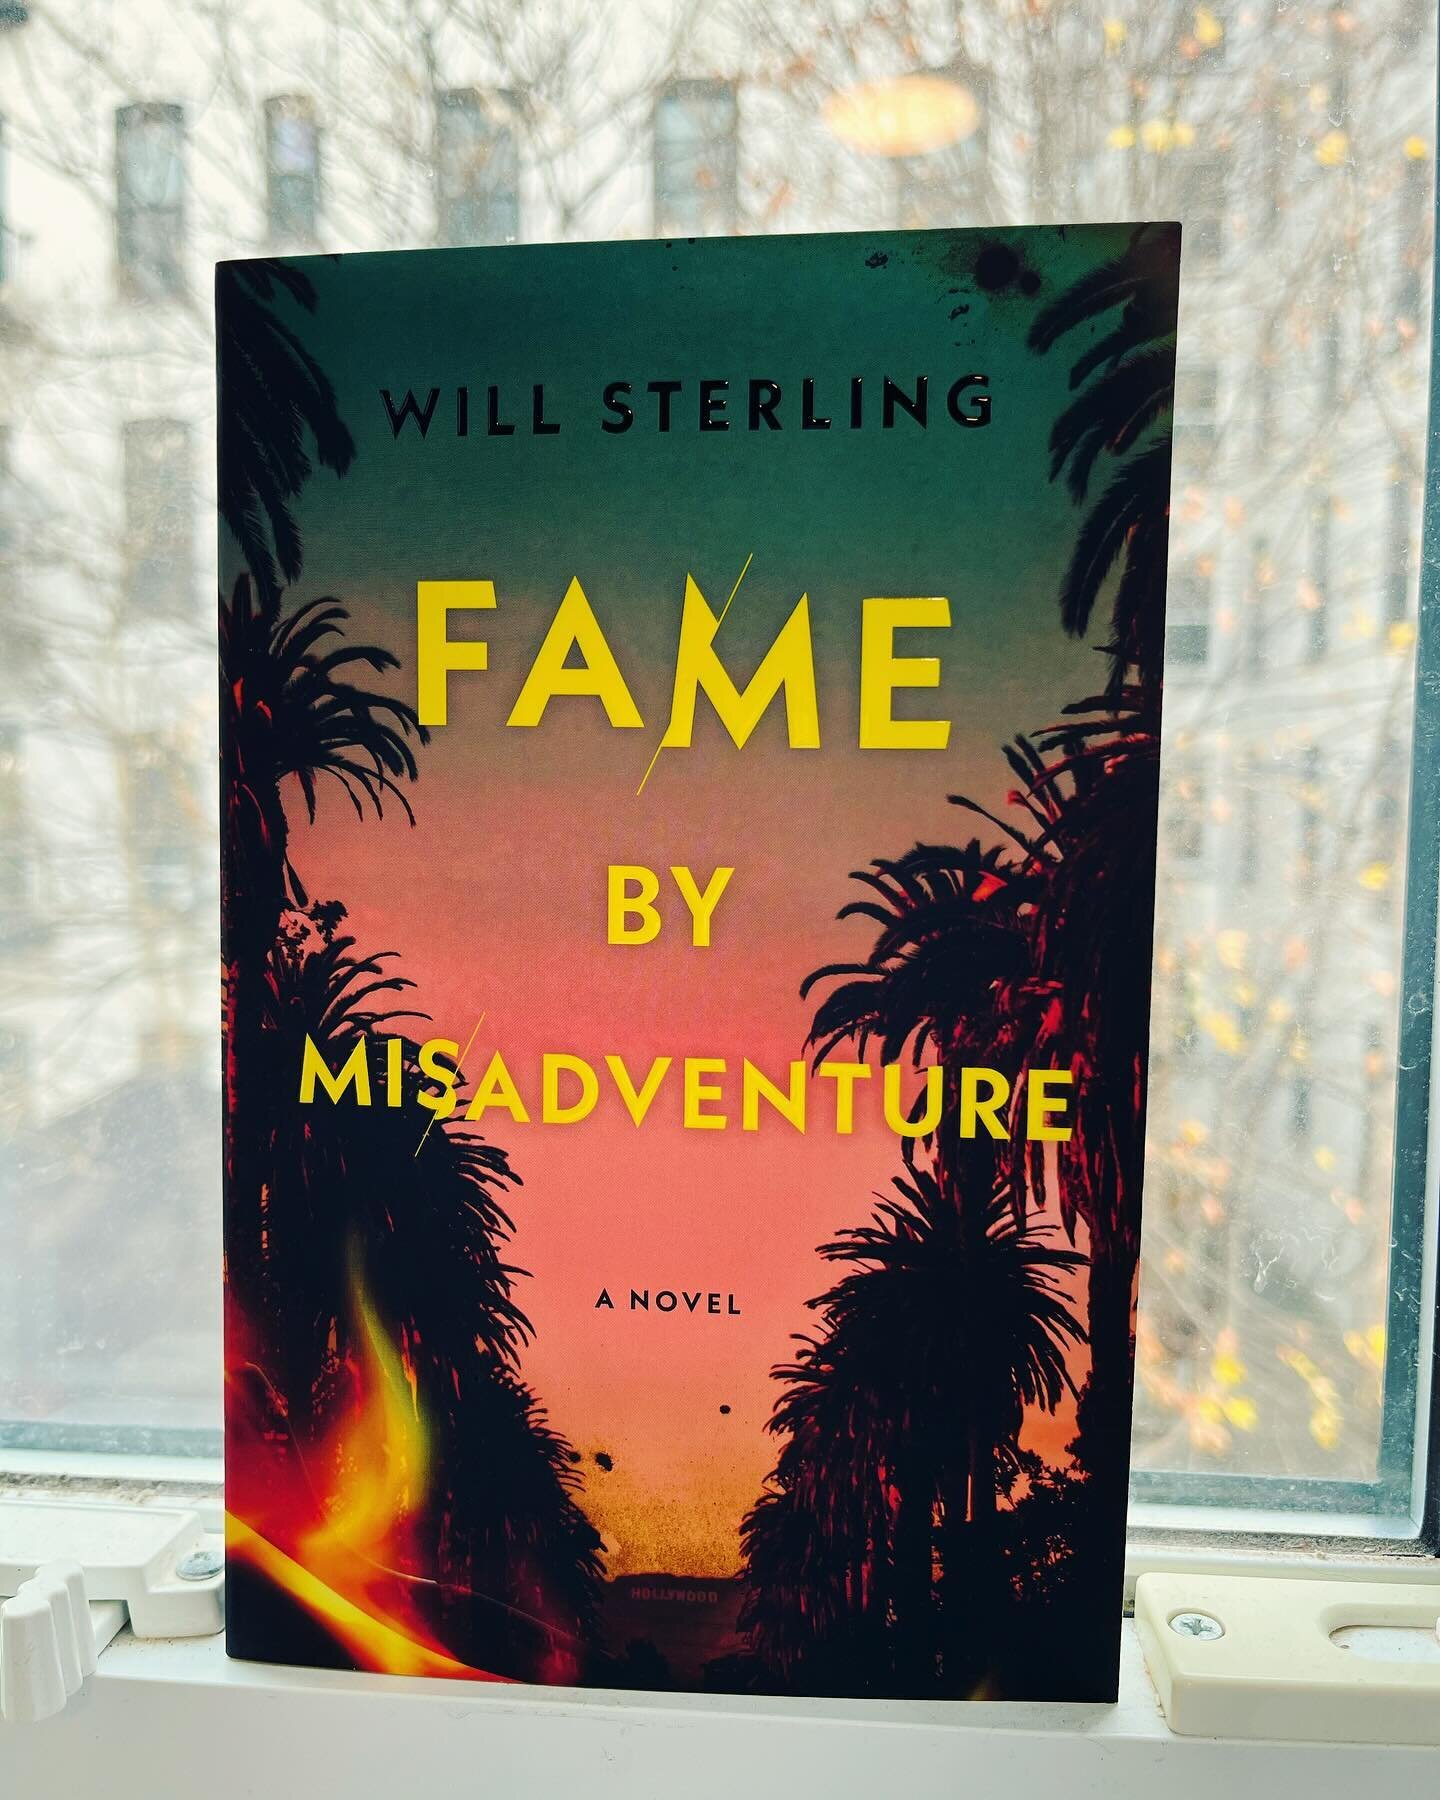 Happy pub day to EMB client Will Sterling and his fantastic novel Fame By Misadventure! If you&rsquo;ve ever watched reality tv and wondered about the people on the screen, this one&rsquo;s for you ☀️